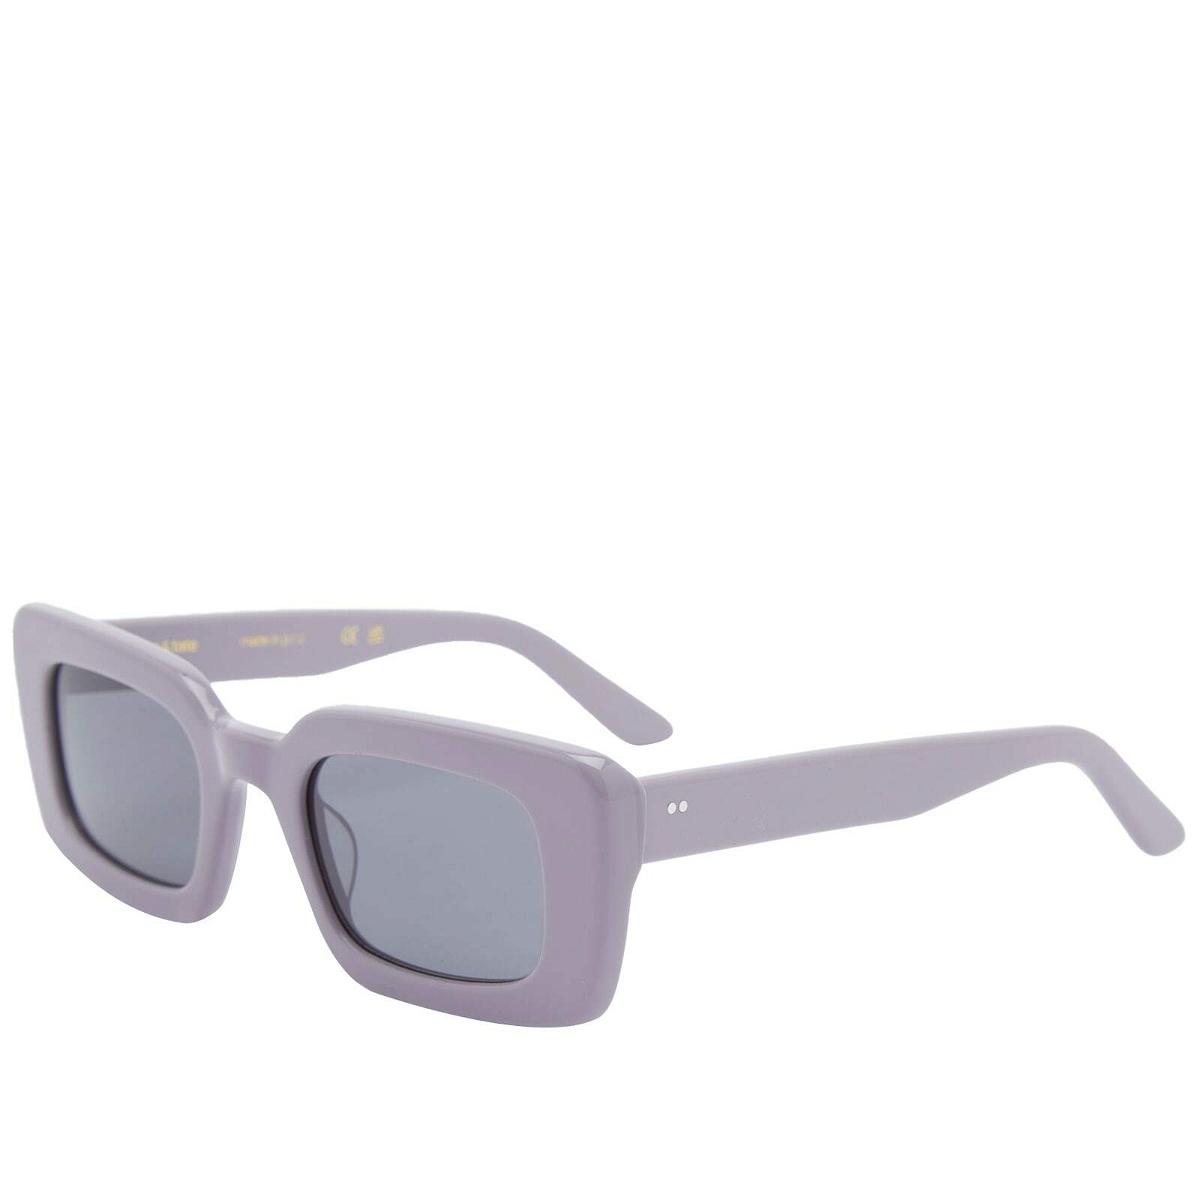 Ace & Tate Women's Jacques Sunglasses in Berry Smoothie 